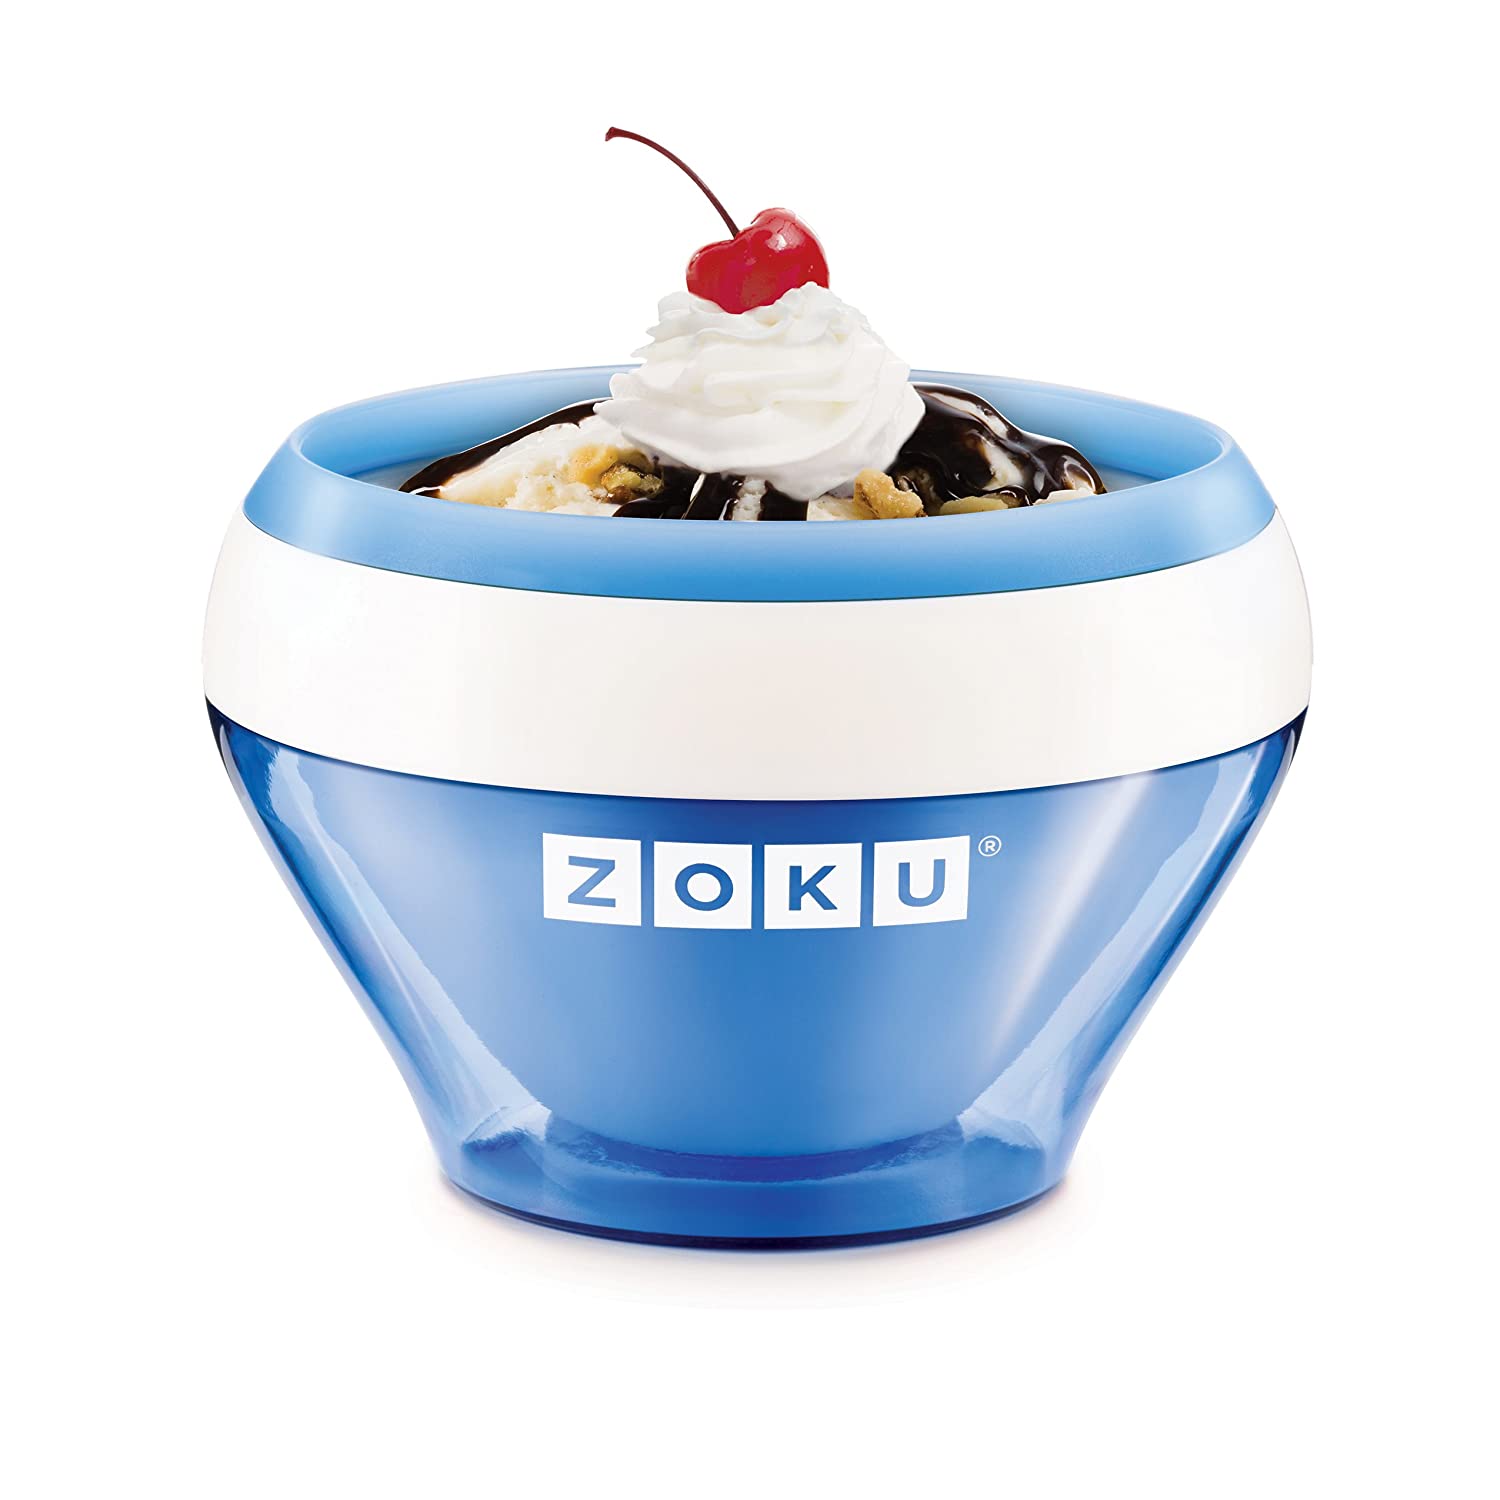 Zoku Ice Cream Maker, Compact Make and Serve Bowl with Stainless Steel Freezer Core Creates Soft Serve, Frozen Yogurt, Ice Cream and More in Minutes, BPA-free, 6 Colors, Blue